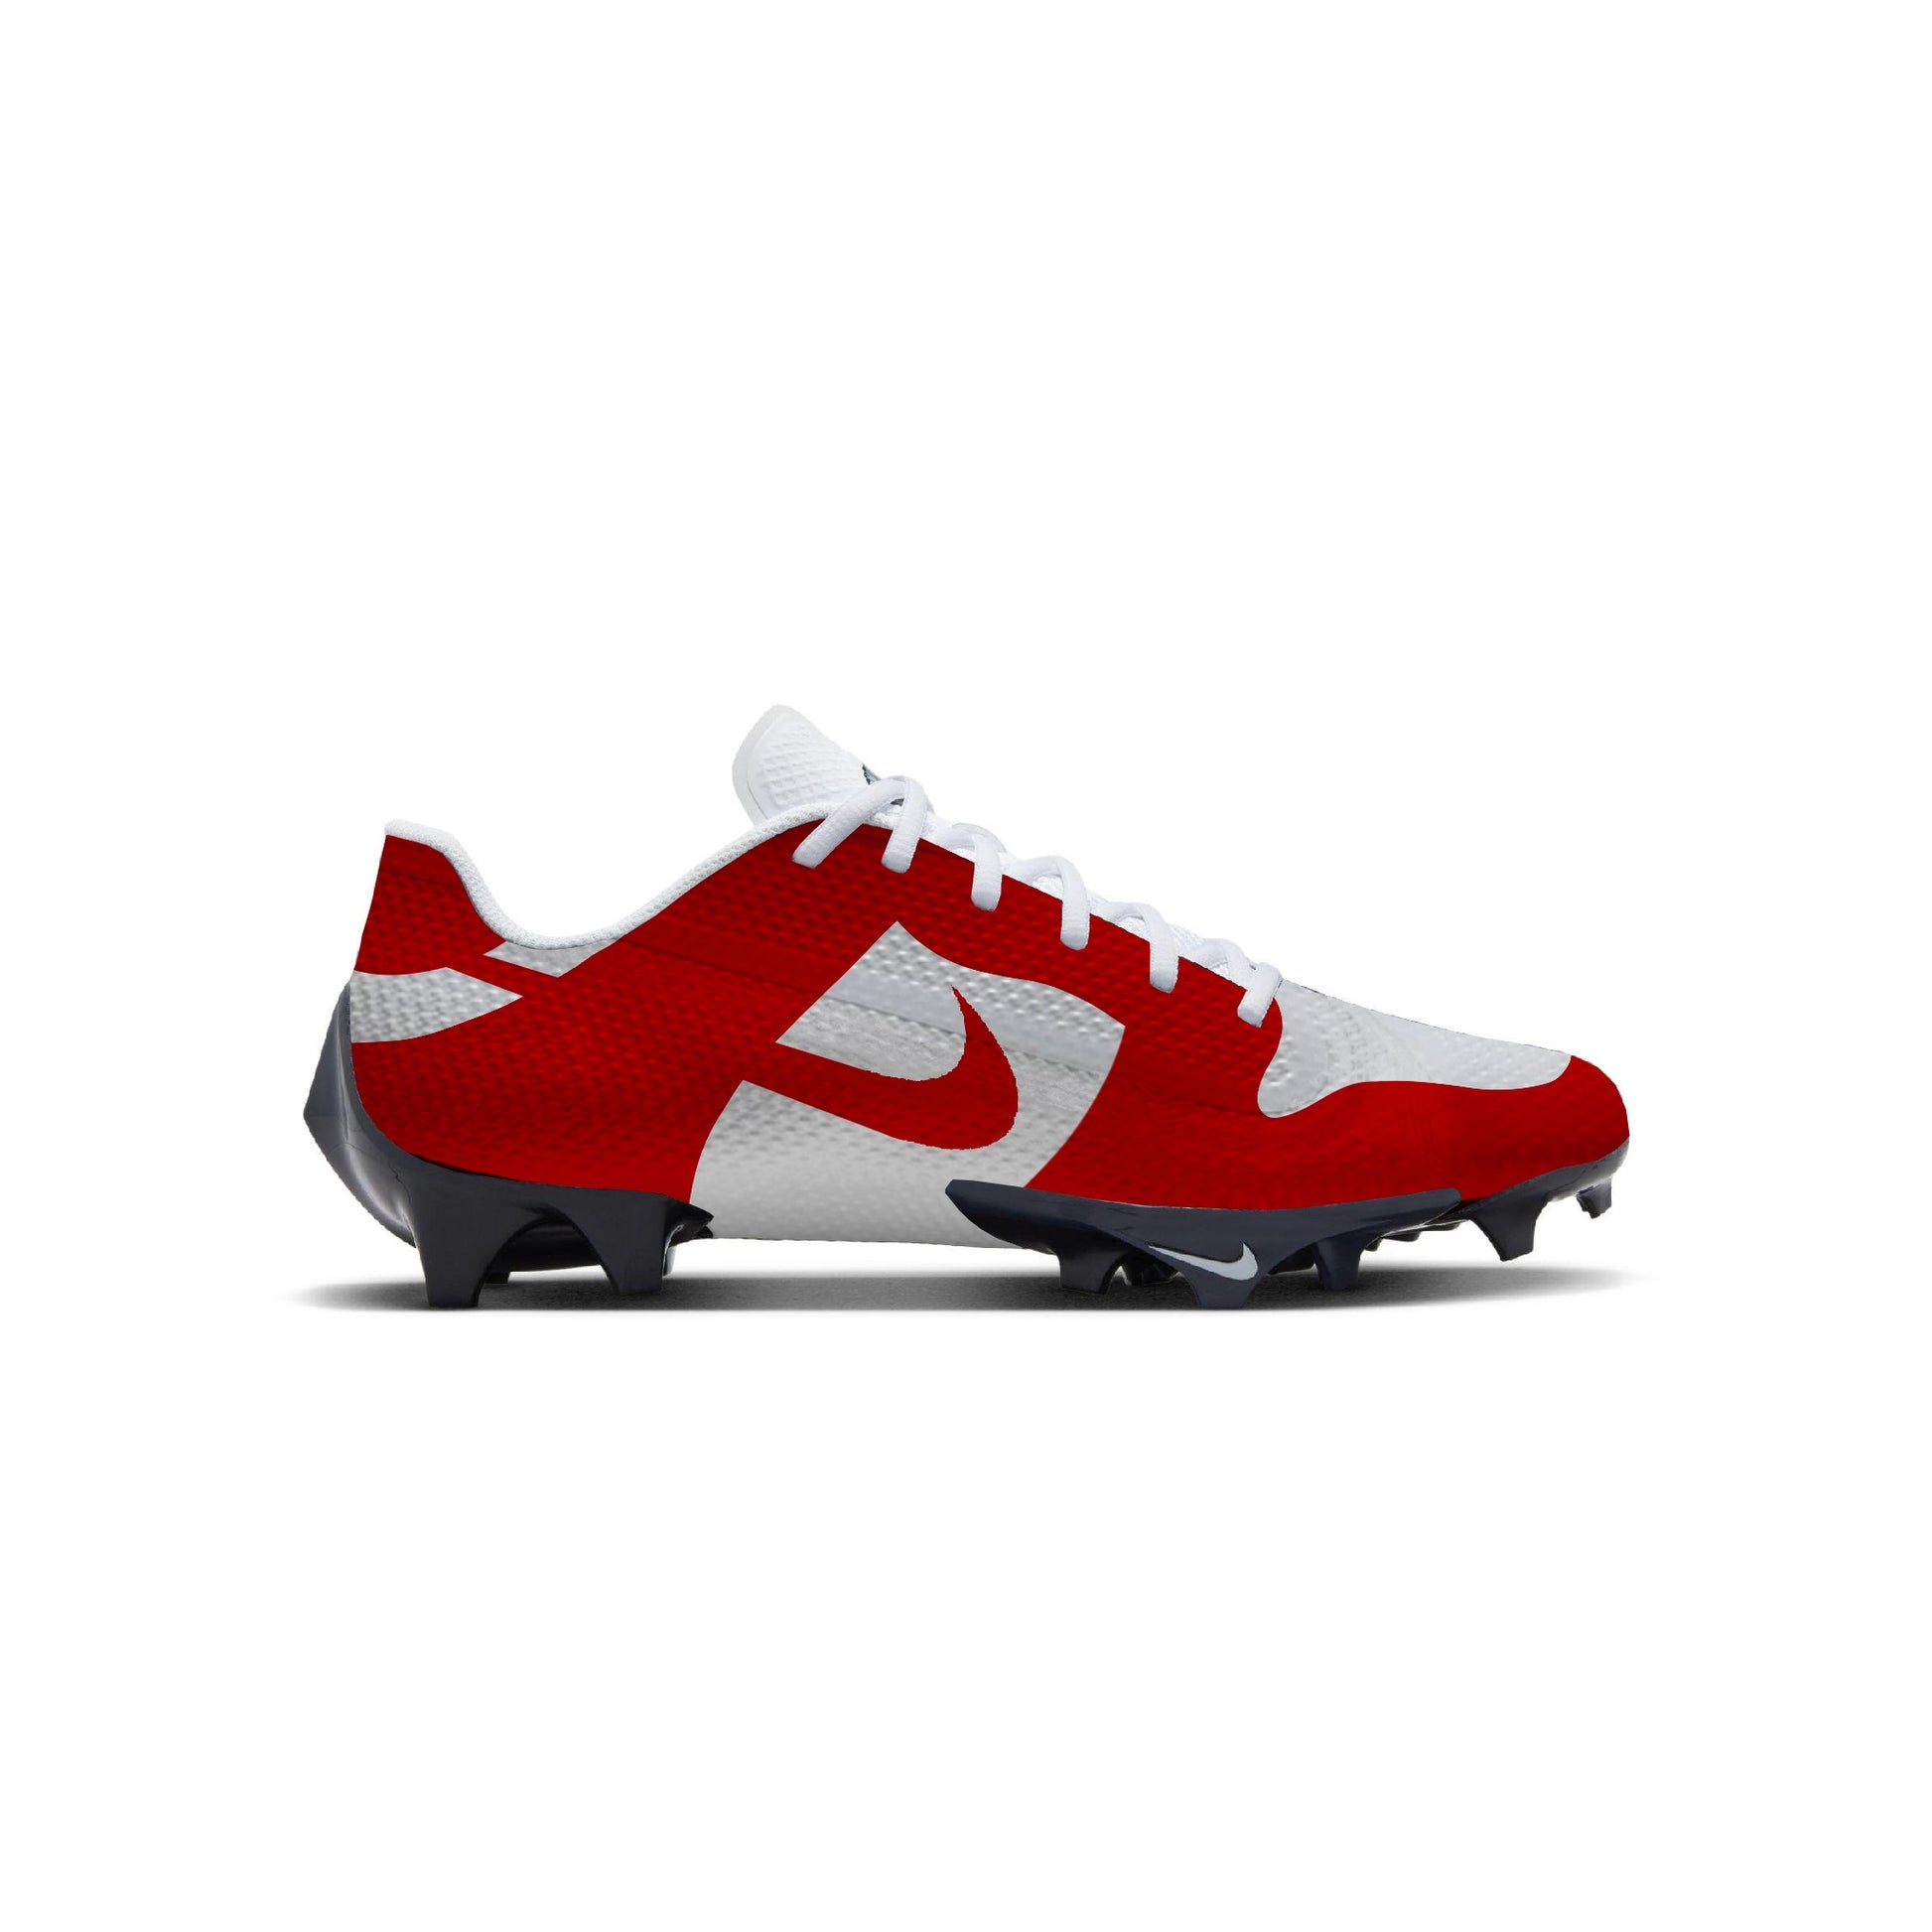 Making a Nike Off White Dunk Cleat ?? (1 of 1) 